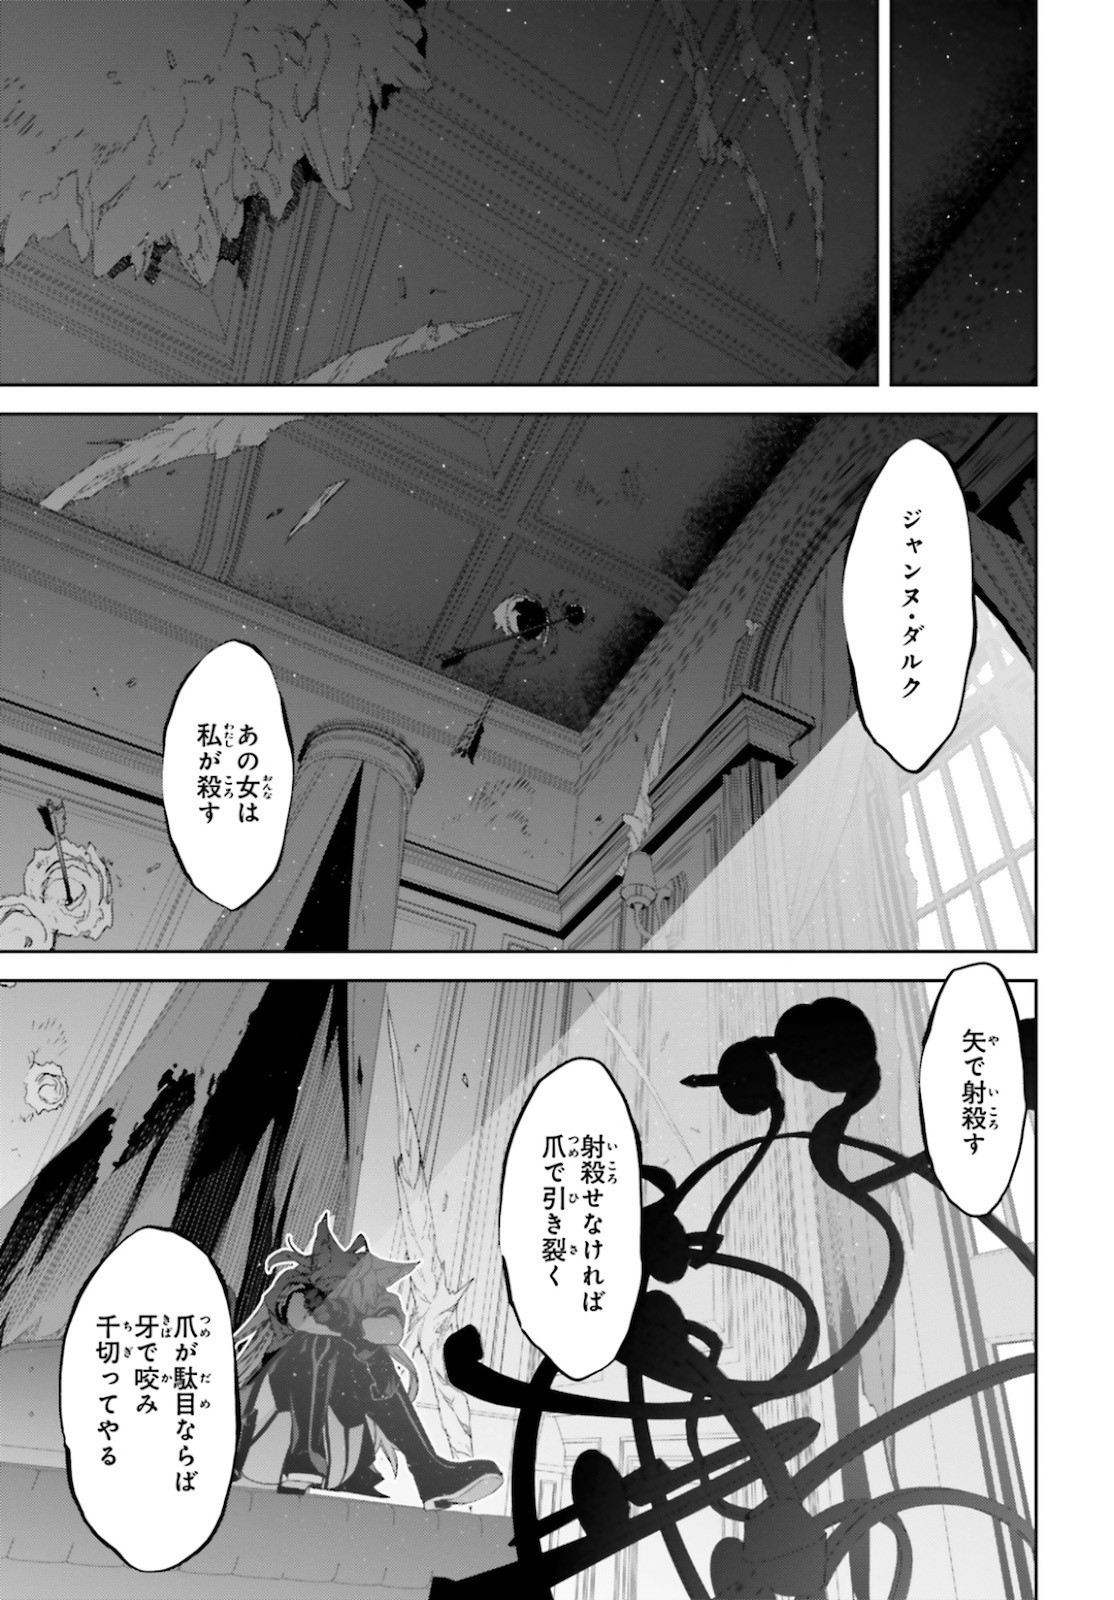 Fate-Apocrypha - Chapter 49 - Page 25